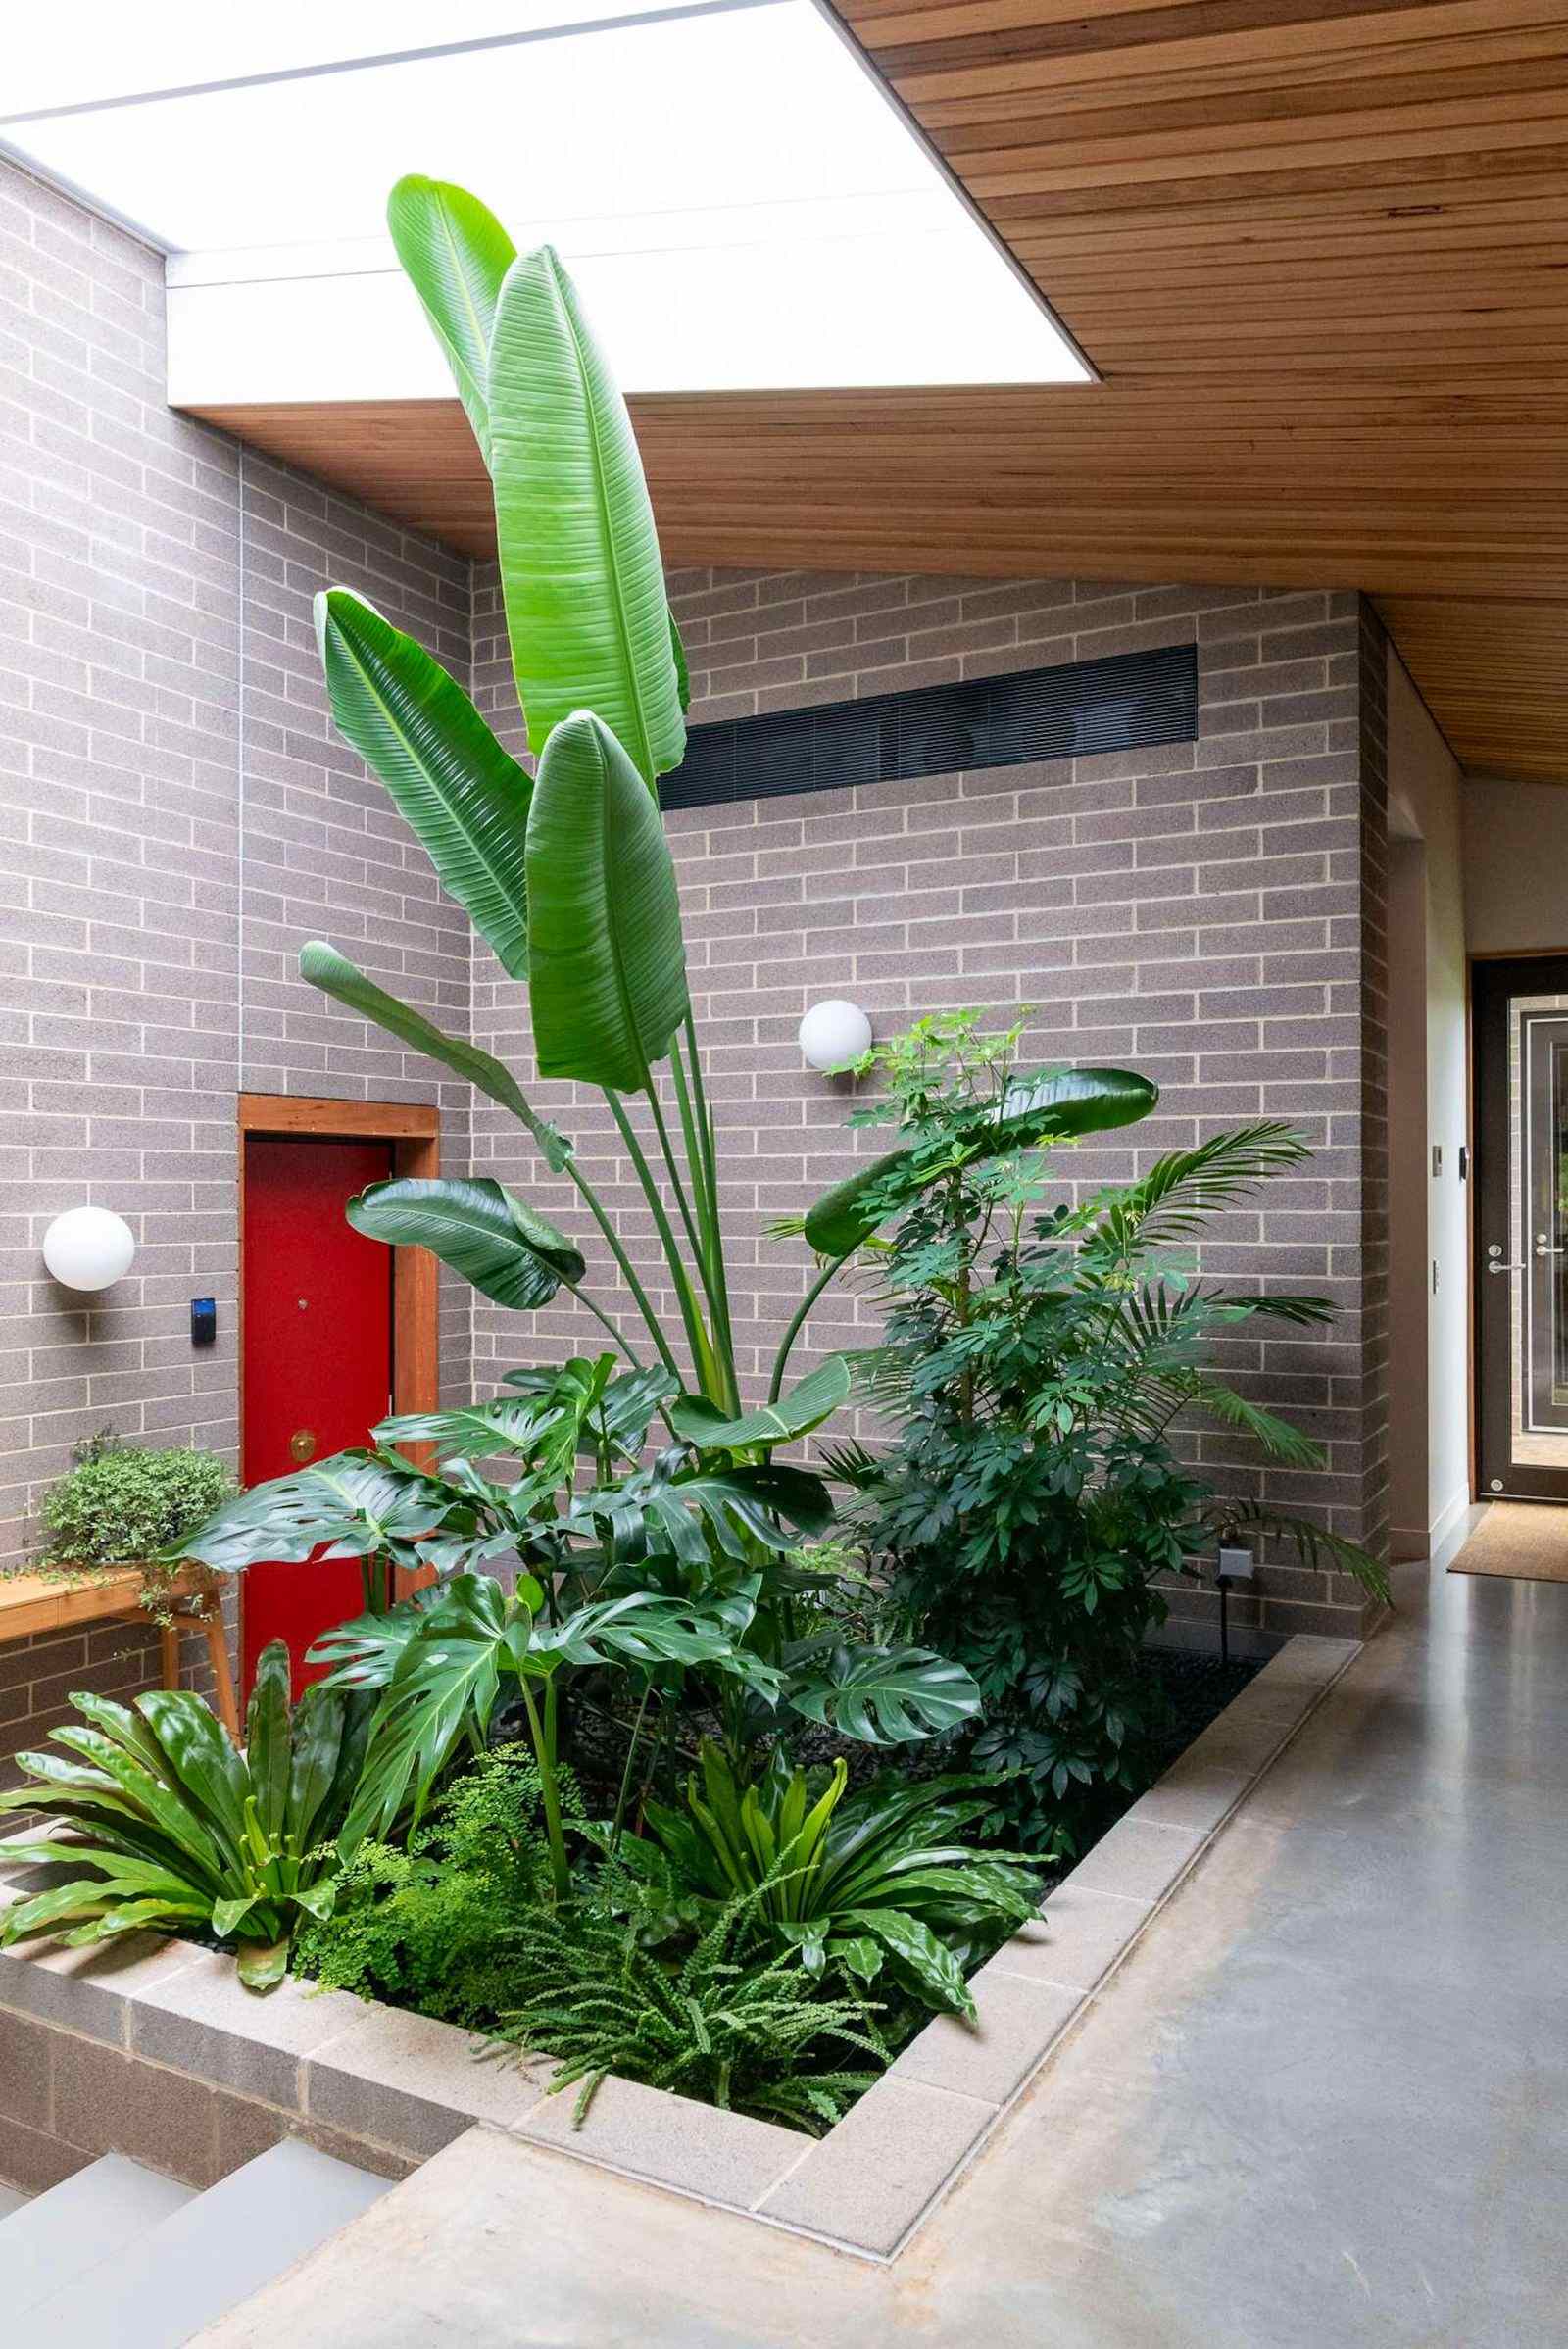 Fern House by Nest Architects showing internal tropical garden